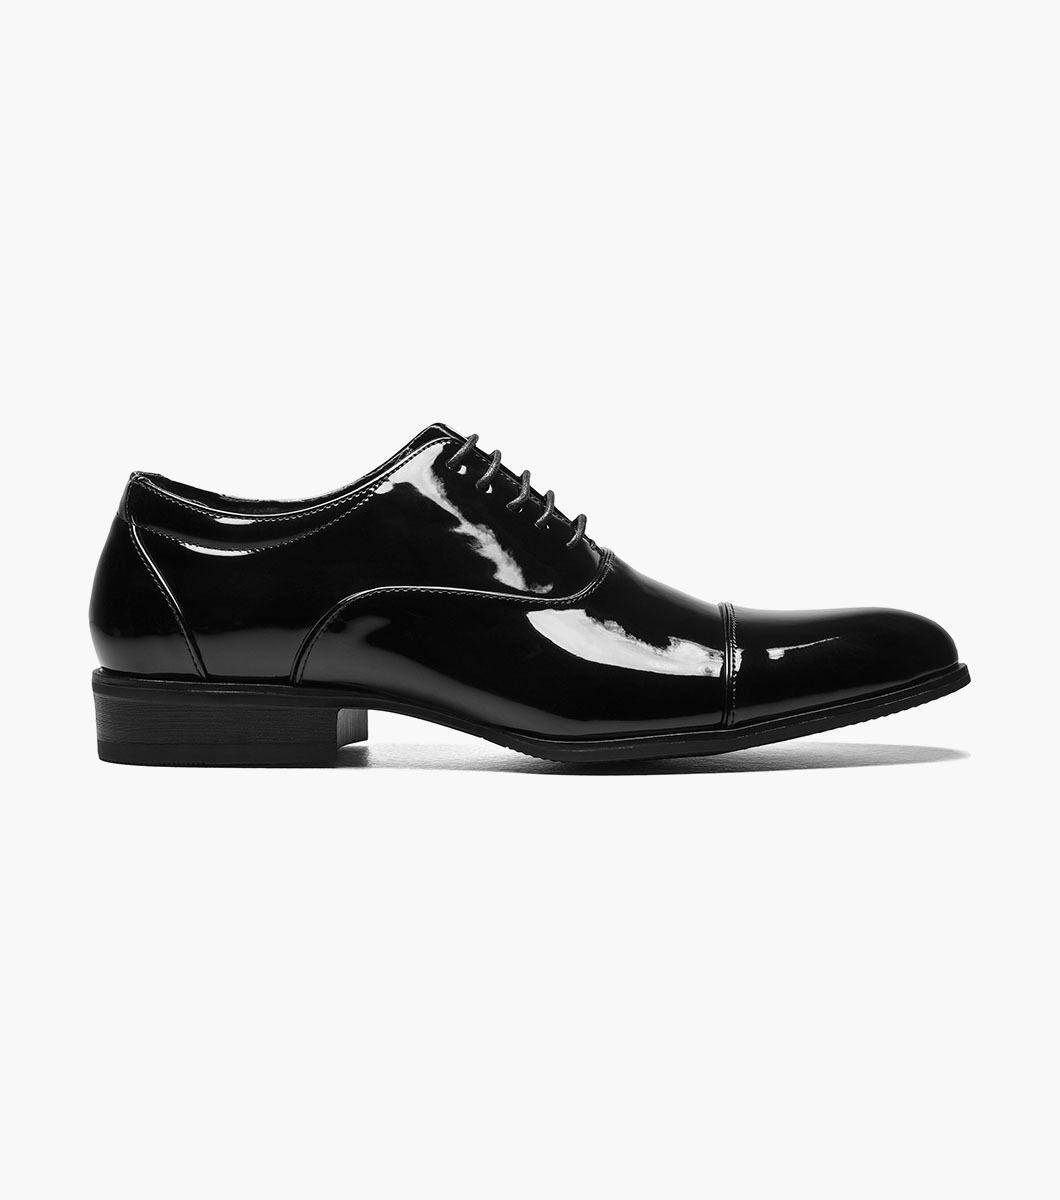 NEW Stacy Adams Men's GALA Cap Toe Oxford Leather Red Prom Wedding Shoes 24998